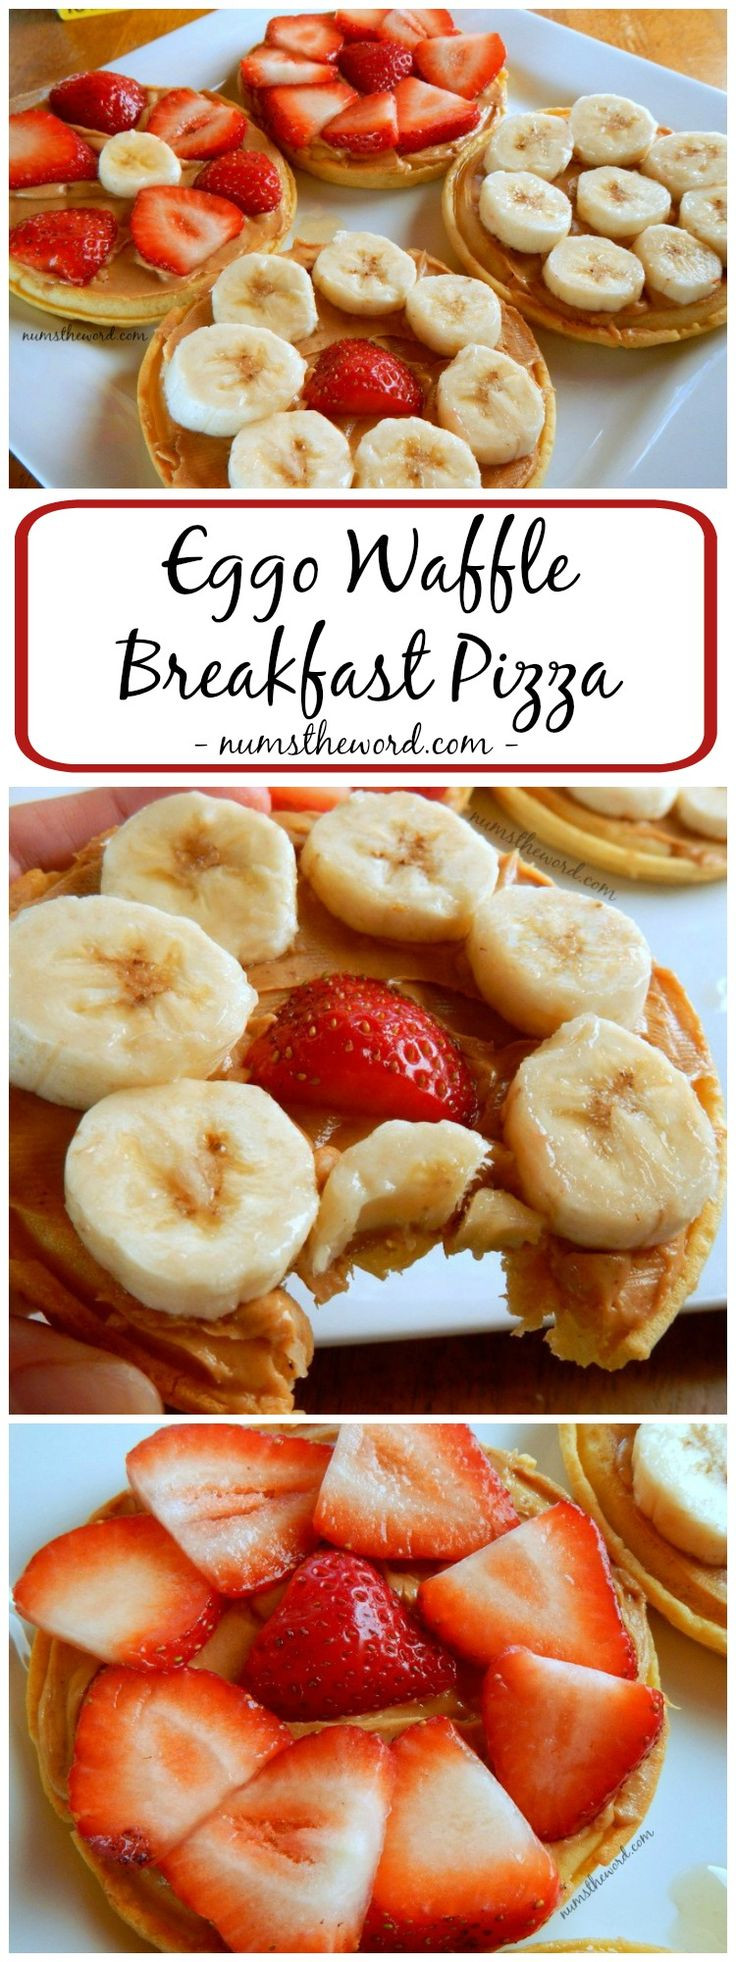 Are Eggo Waffles Healthy
 160 best images about Smart Snacks for Kids on Pinterest